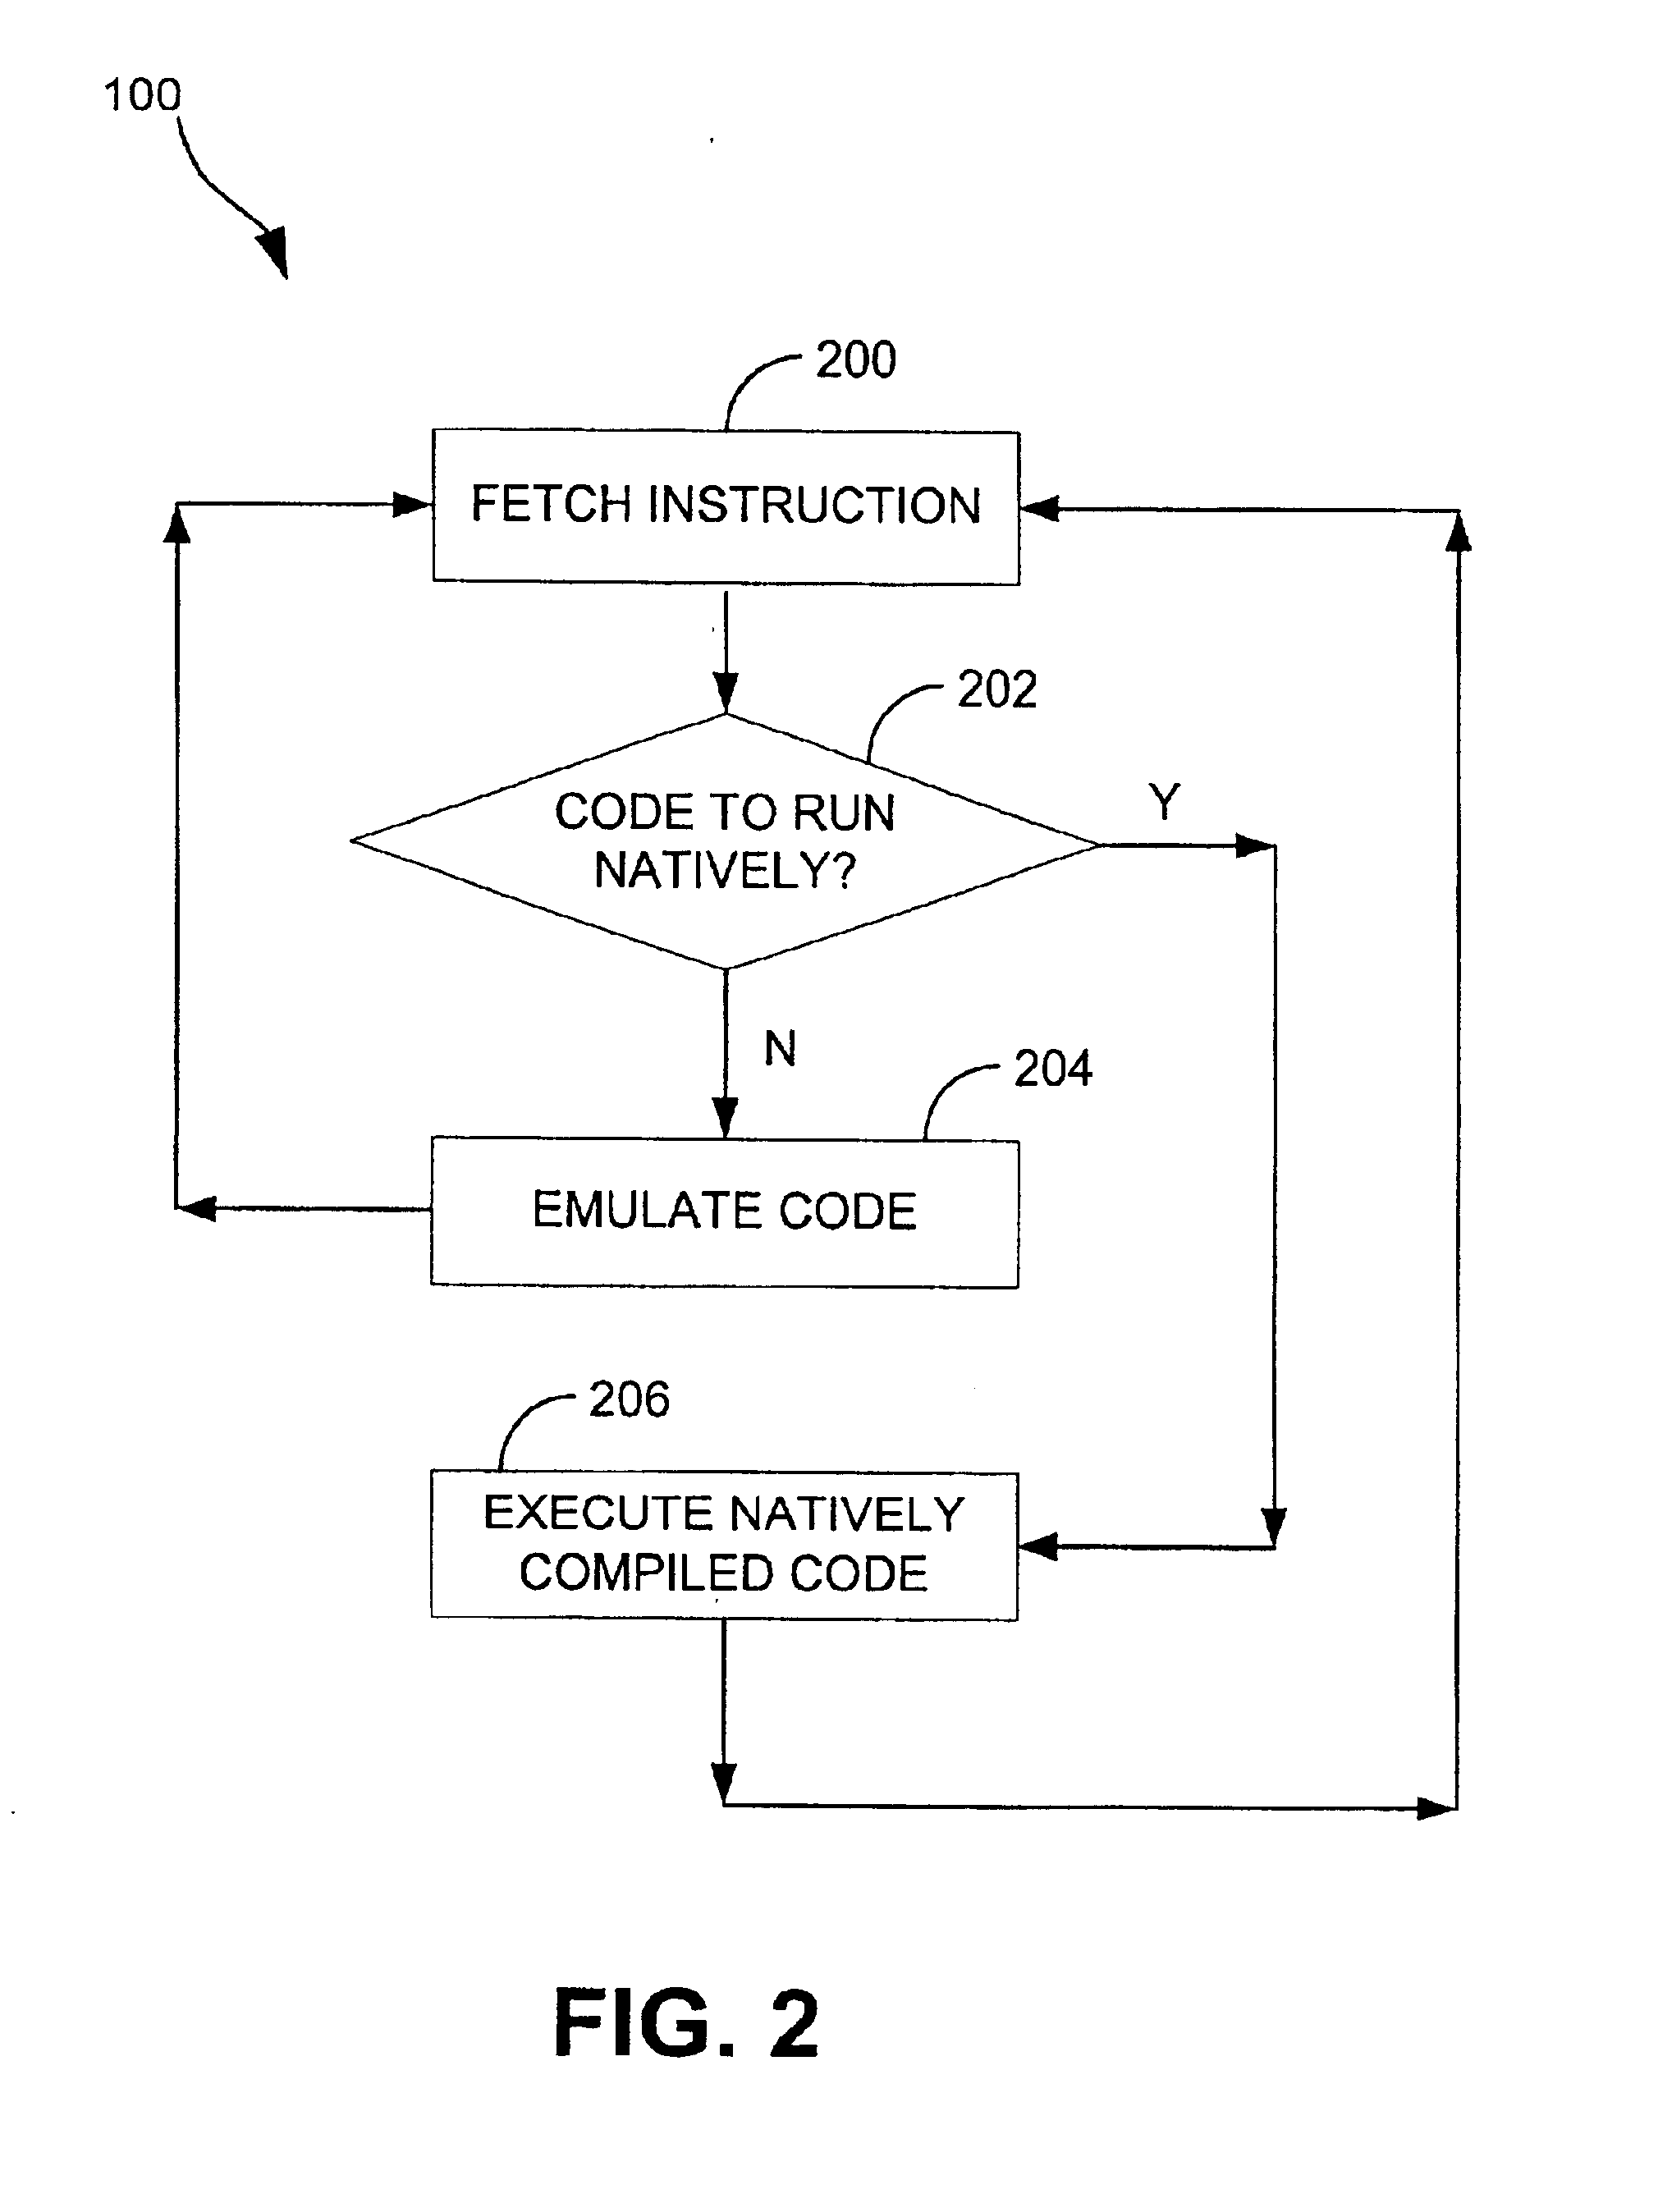 Systems and methods for integrating emulated and native code